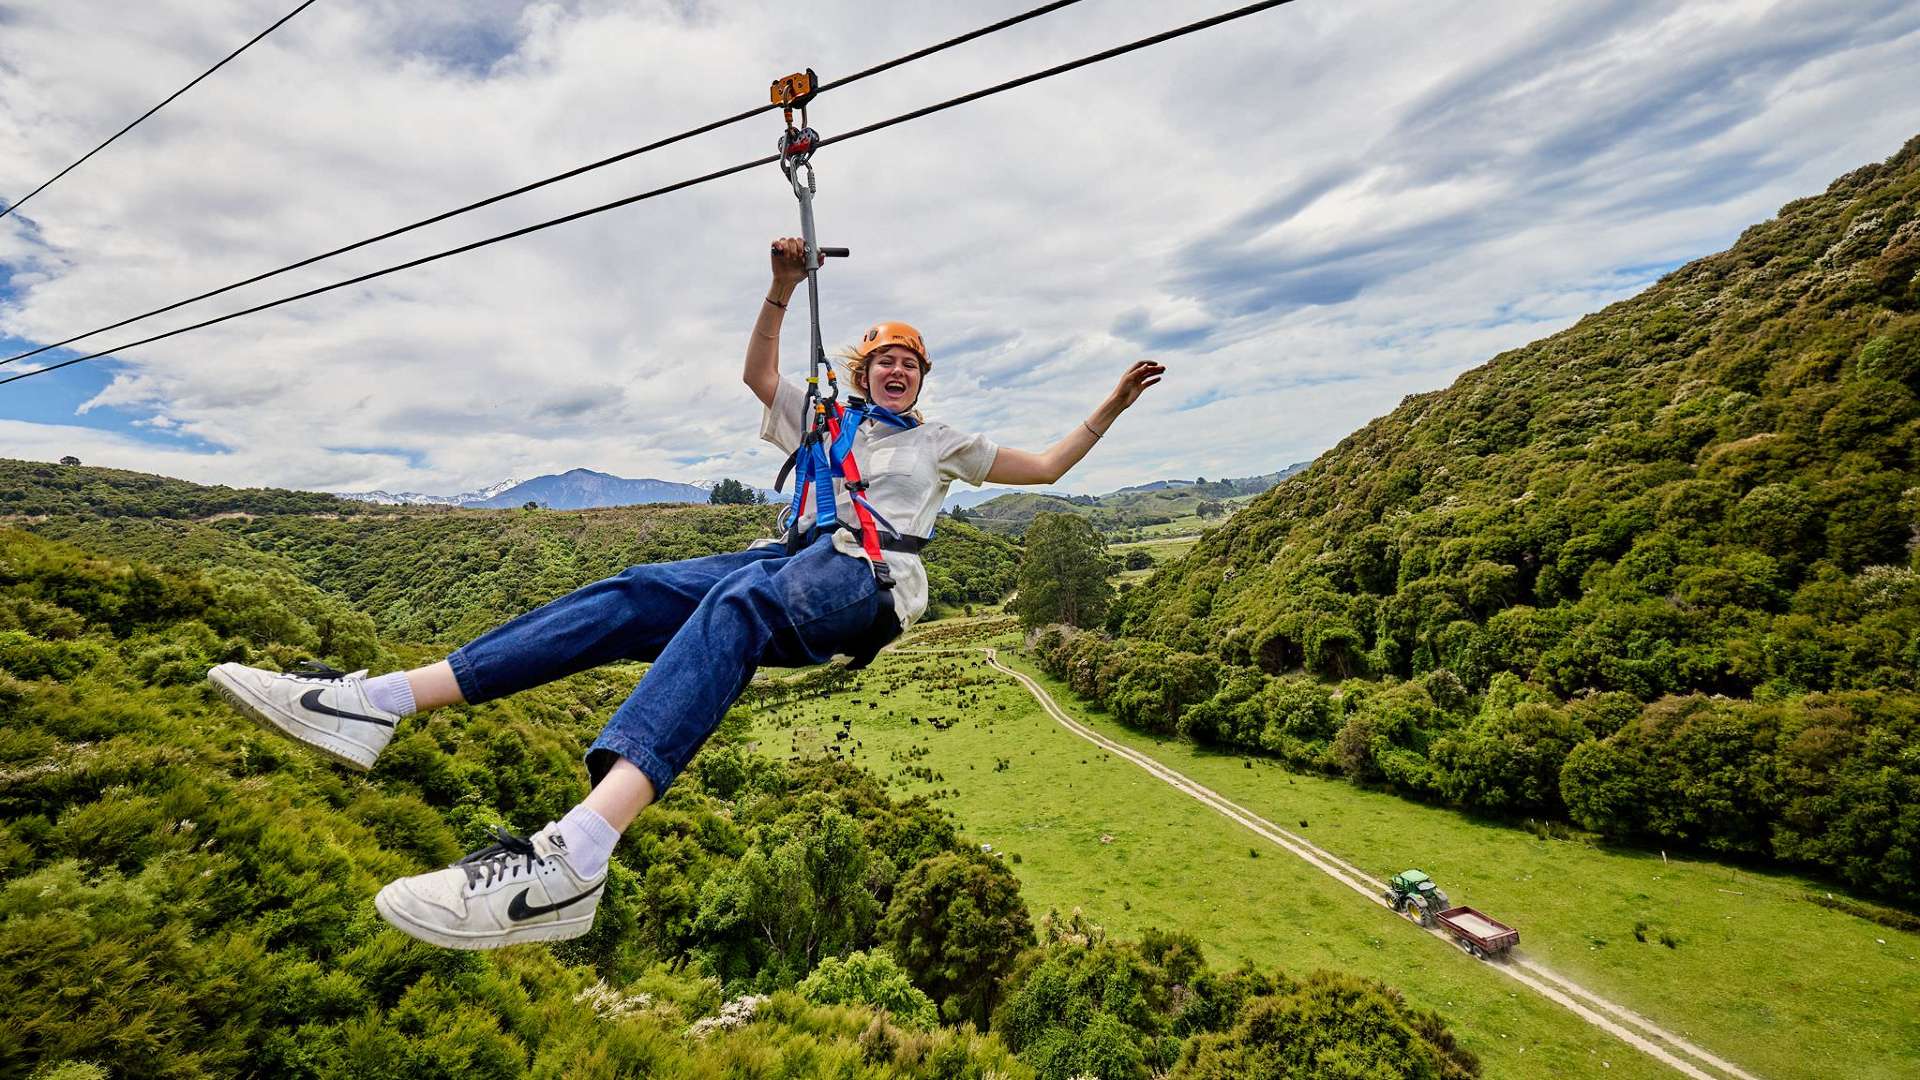 Calling All Adrenaline Seekers: South Island's Kaikoura Just Launched 600 Metres of Ziplines